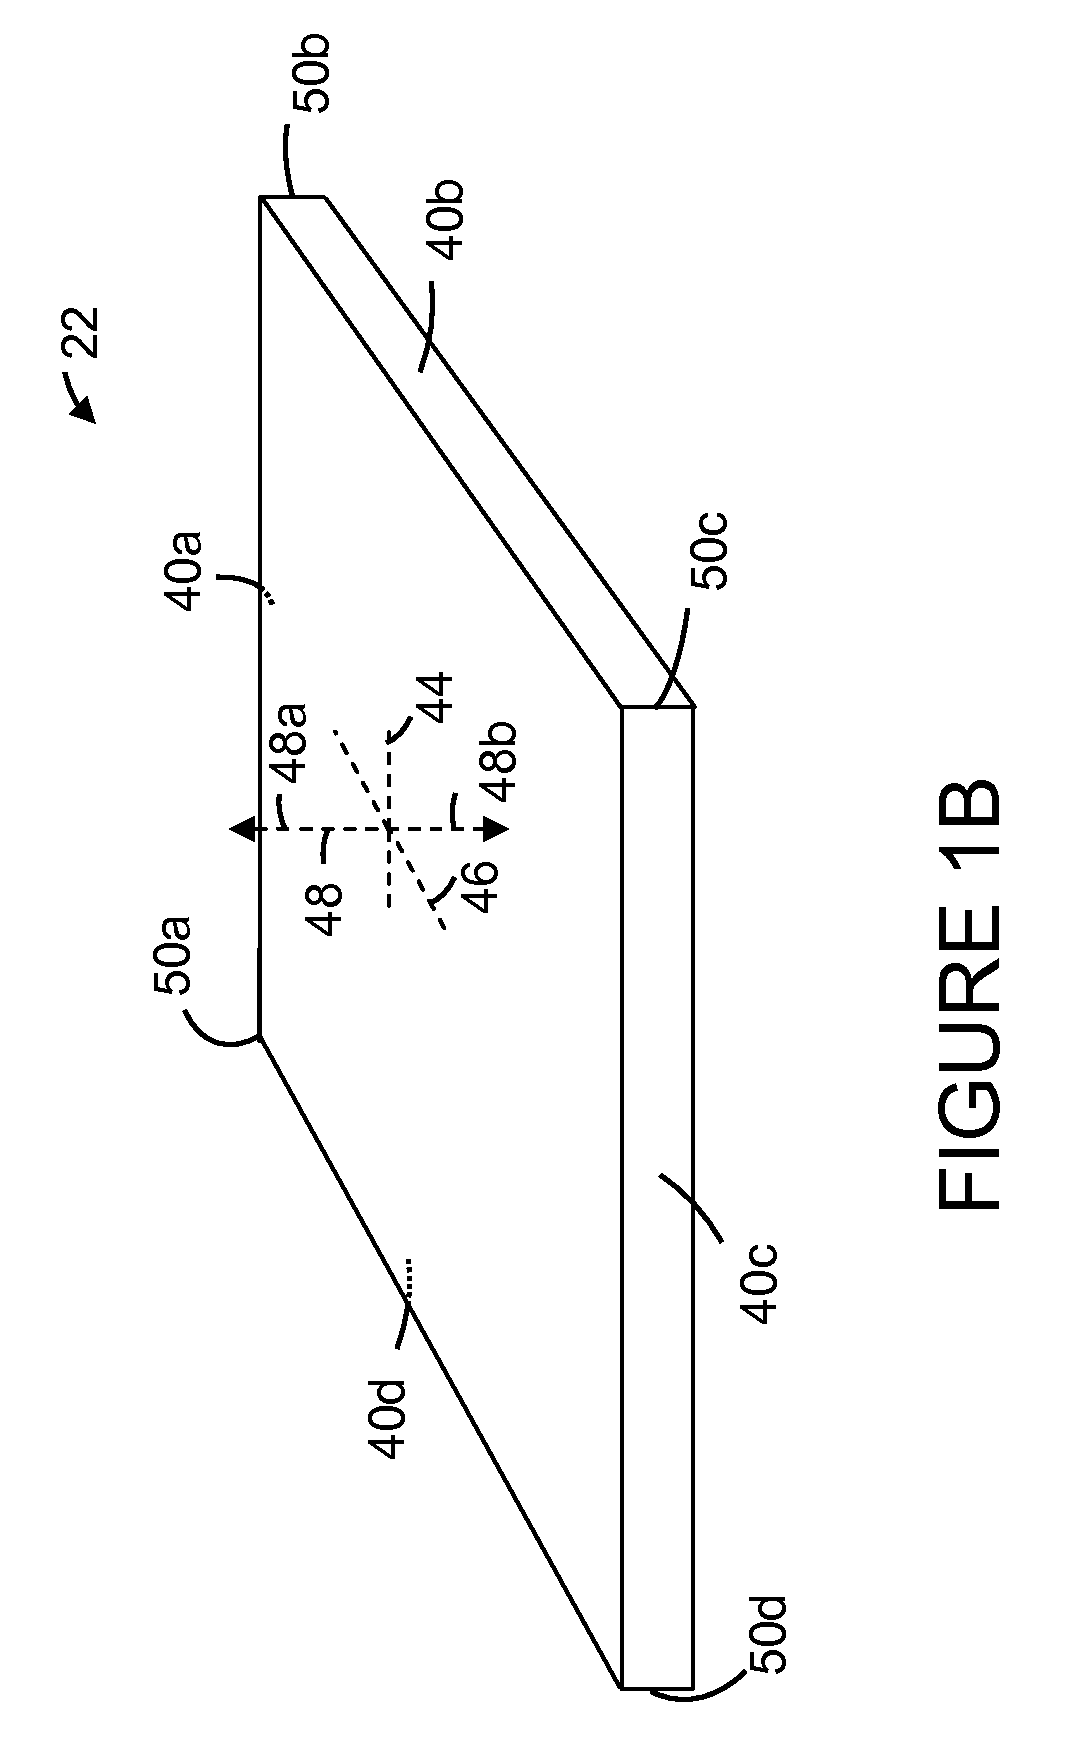 MEMS resonator array structure and method of operating and using same